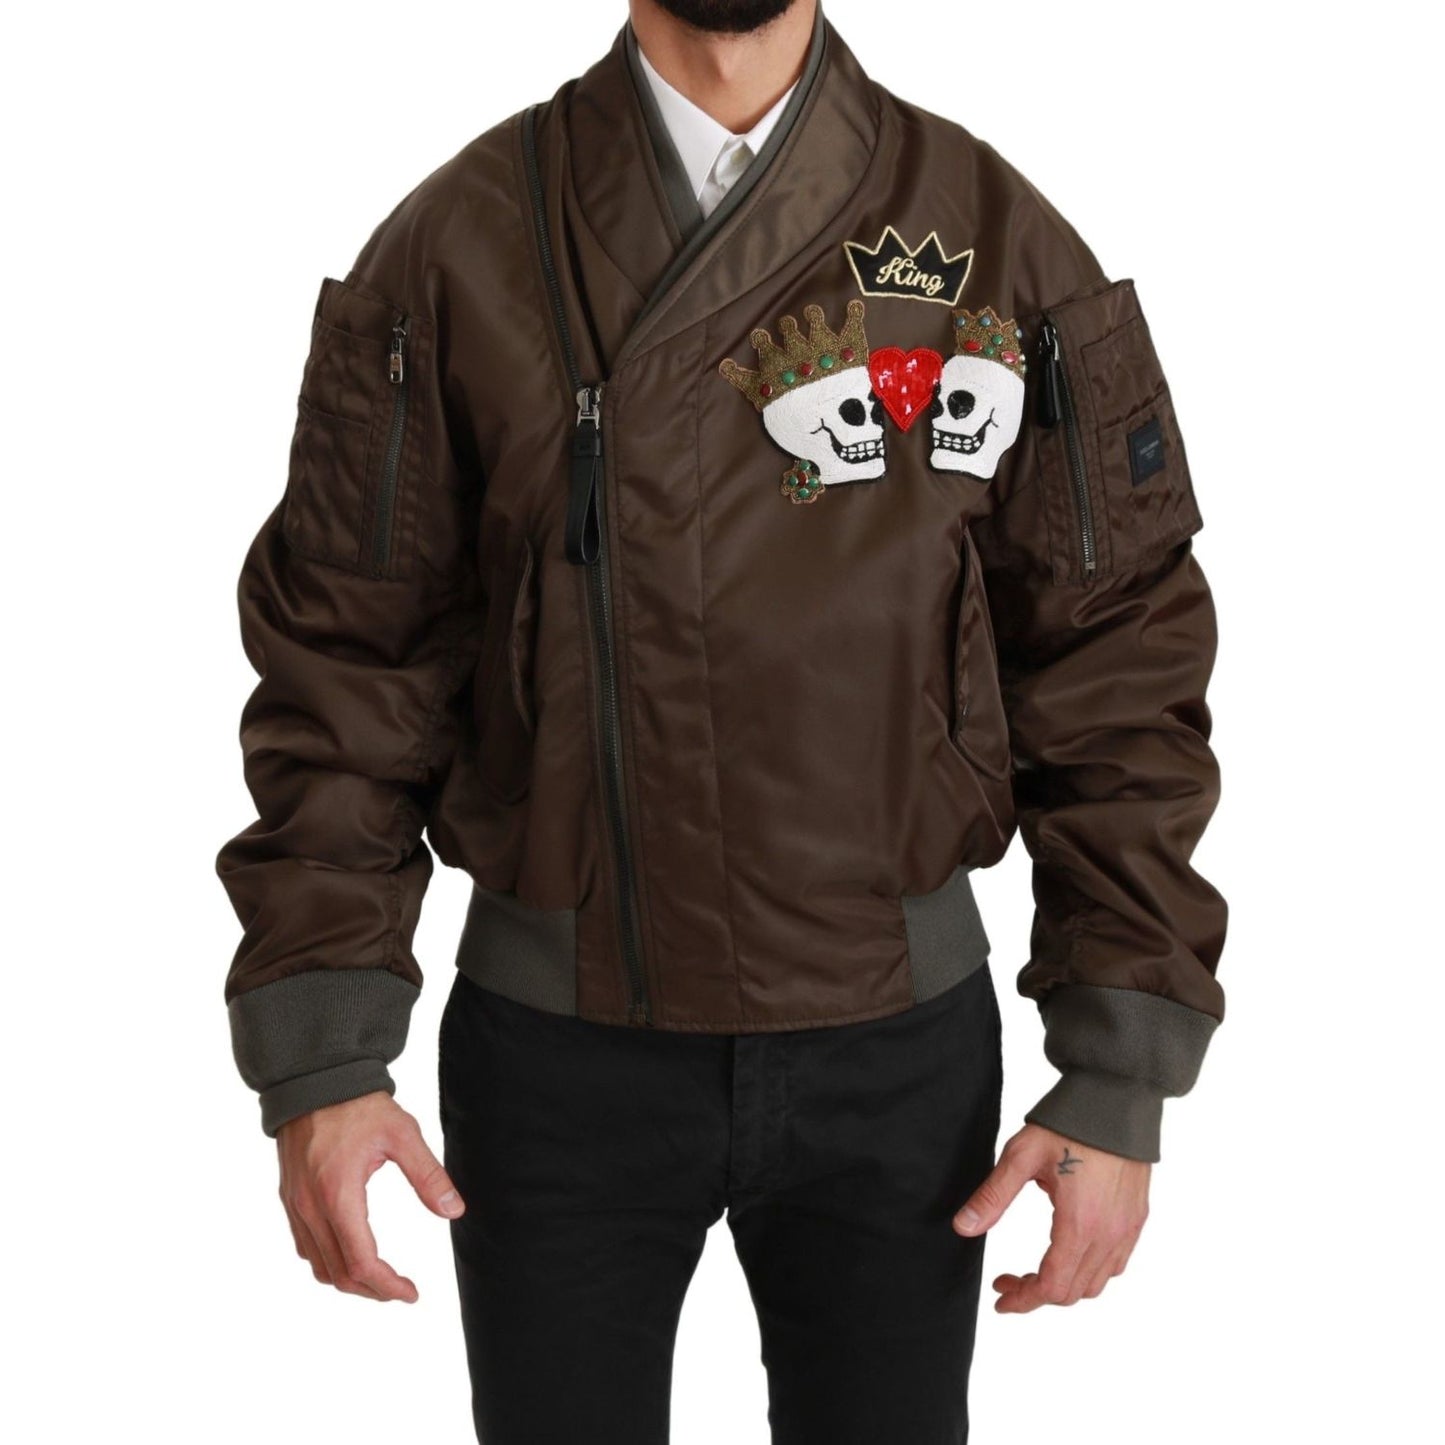 Dolce & Gabbana Sequined Double-Breasted Bomber Jacket brown-beaded-crown-skull-logo-jacket Coats & Jackets